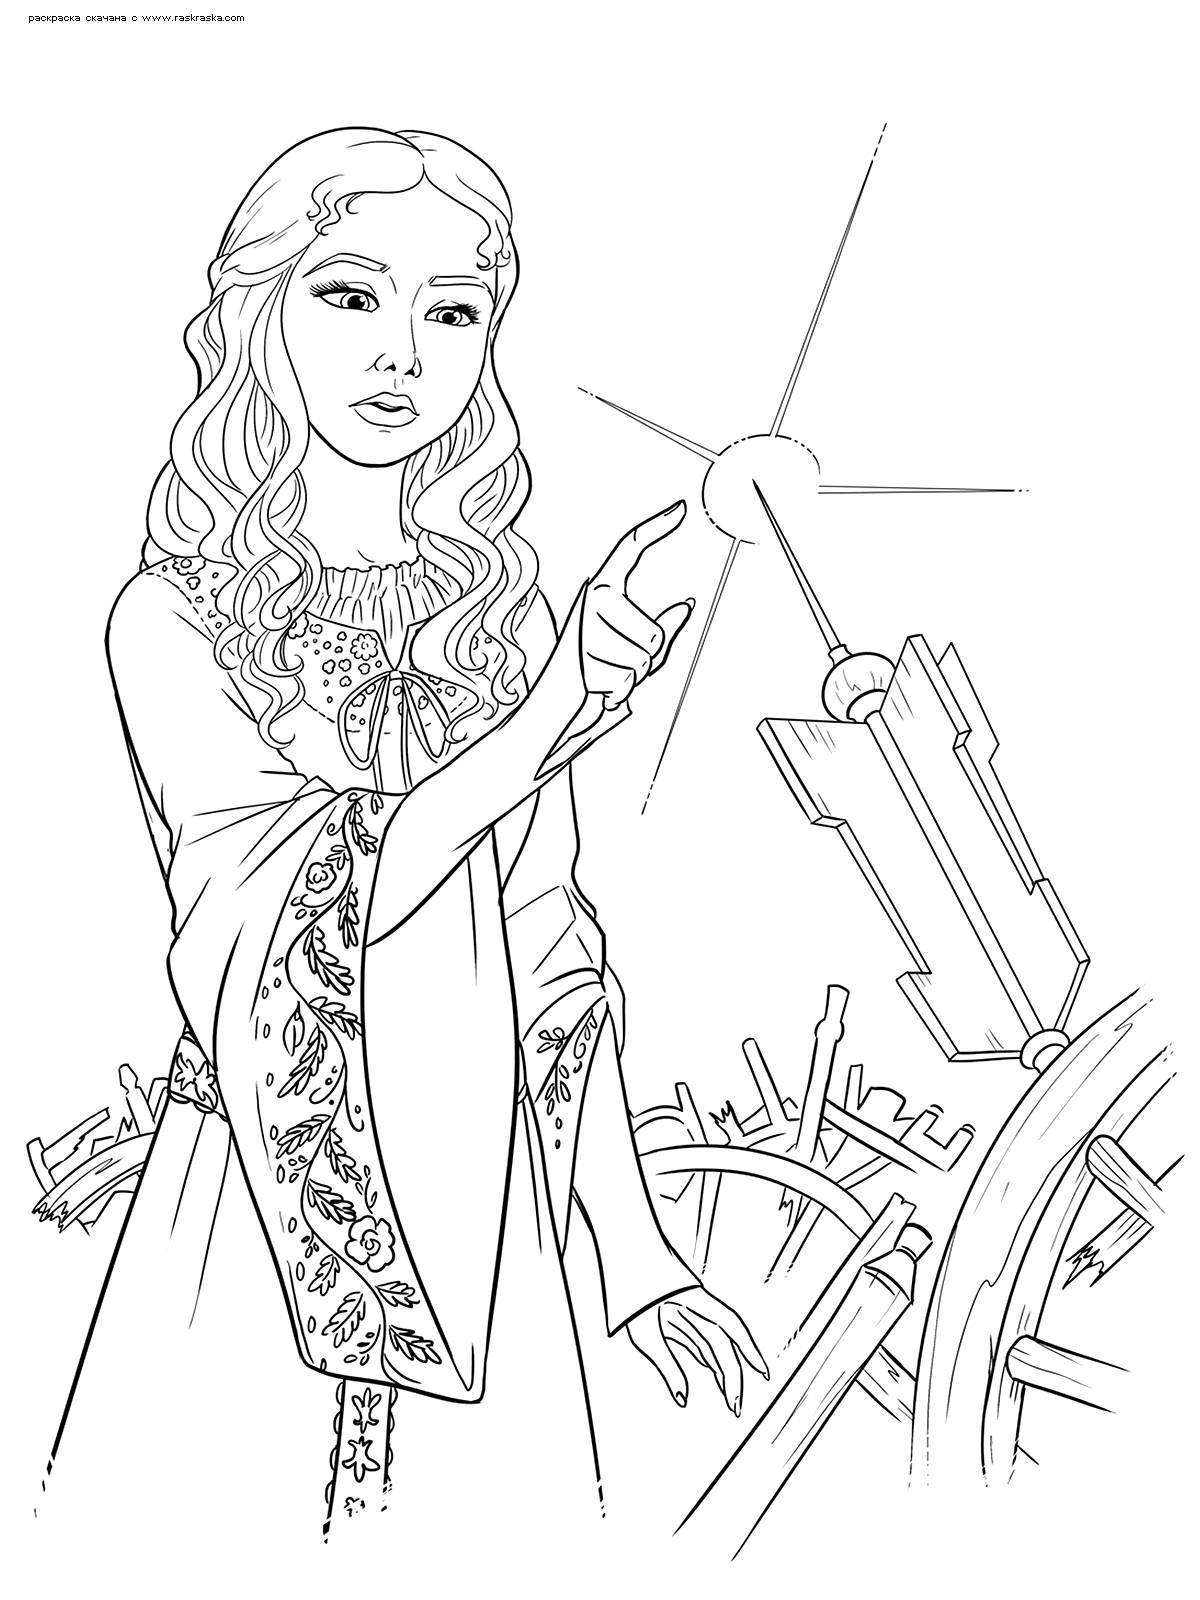 Coloring page graceful maleficent